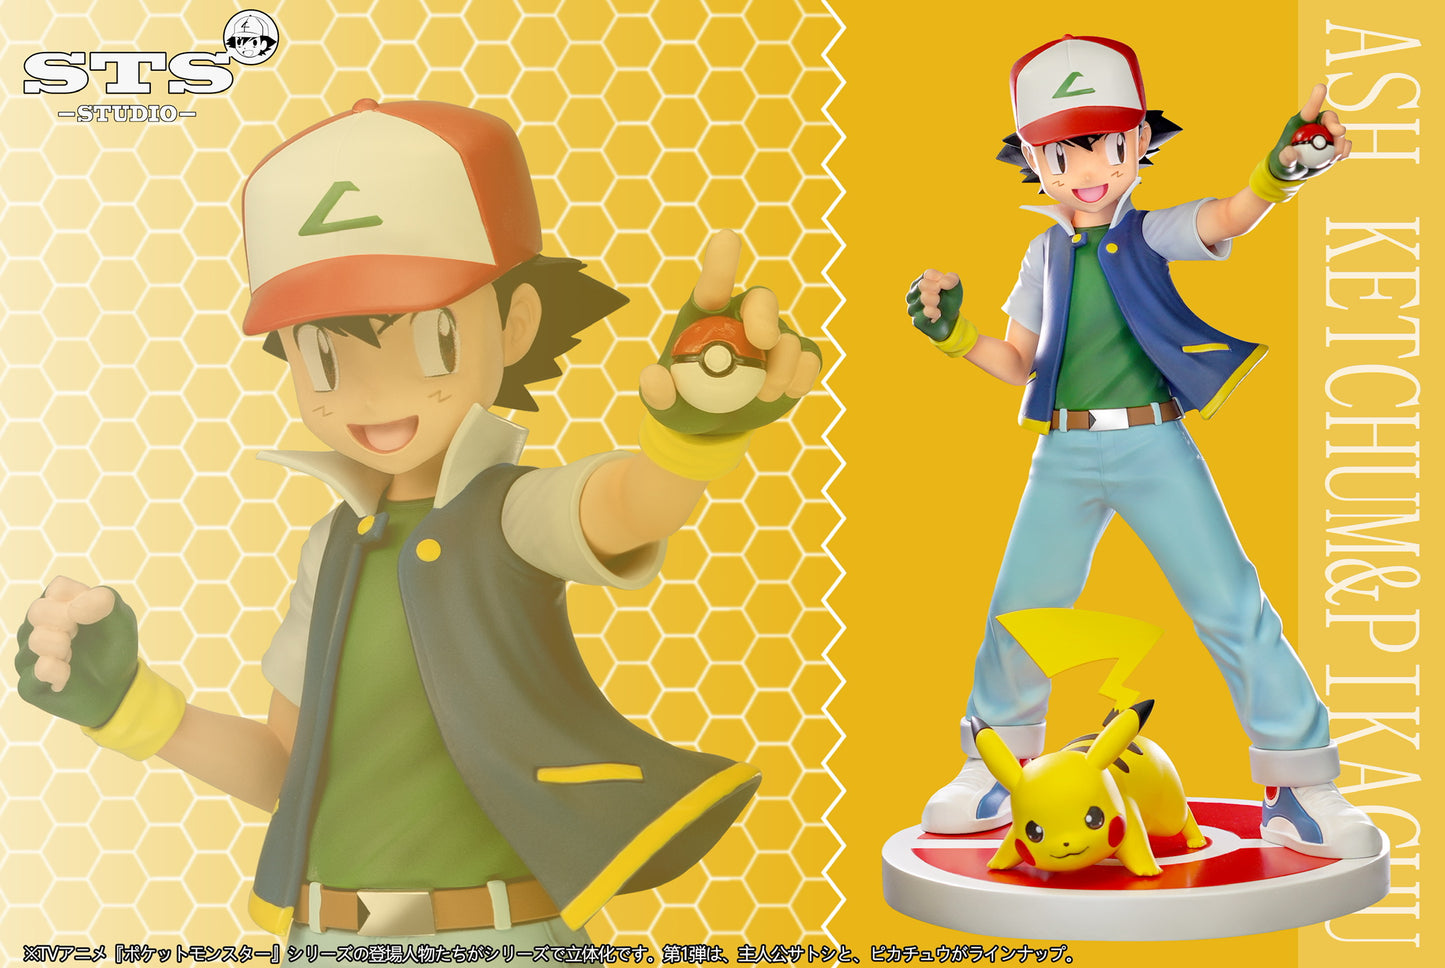 [PREORDER CLOSED] 1/20 Scale World Figure [STS] - Ash Ketchum & Pikachu